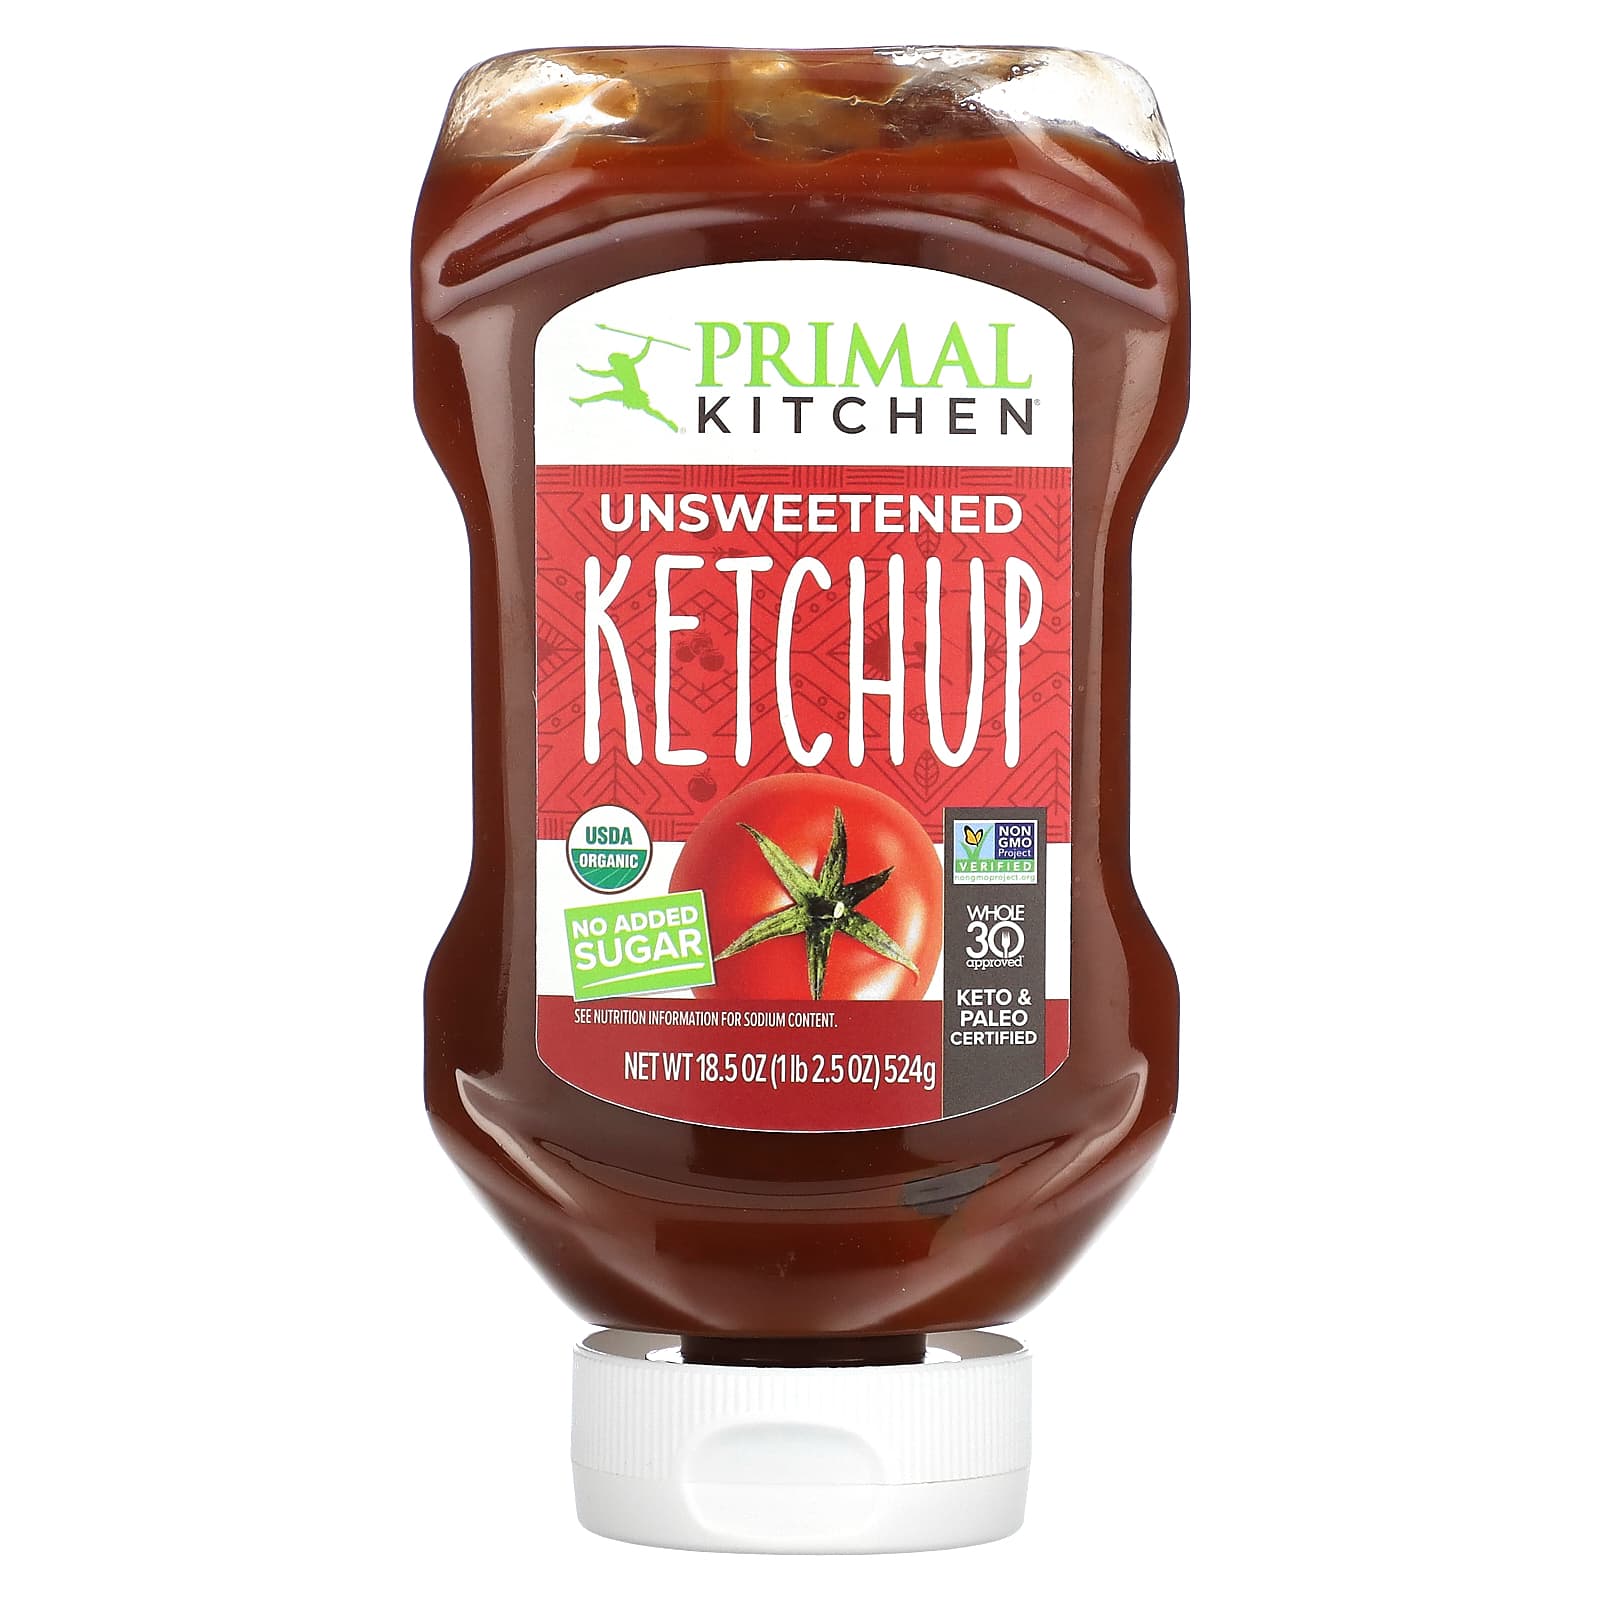 Unsweetened Ketchup, 18.5 oz (524 g)